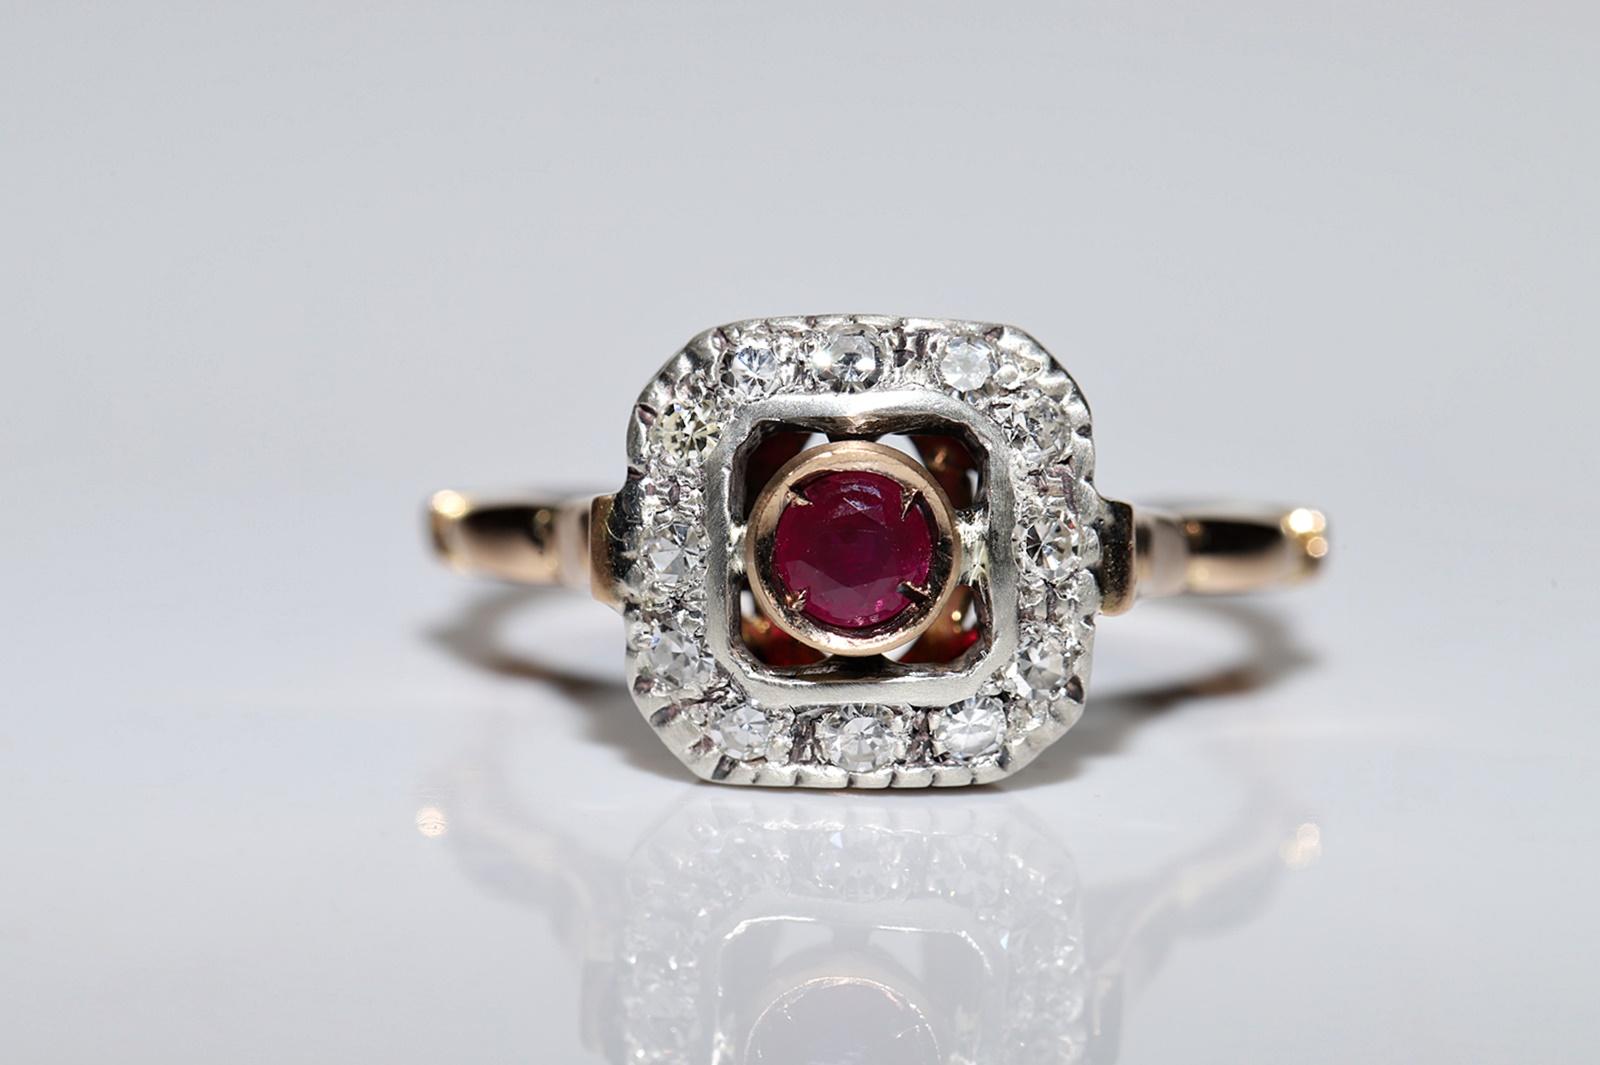 Antique Circa 1900s 14k Gold Top Silver Natural Diamond And Ruby Decorated Ring In Good Condition For Sale In Fatih/İstanbul, 34